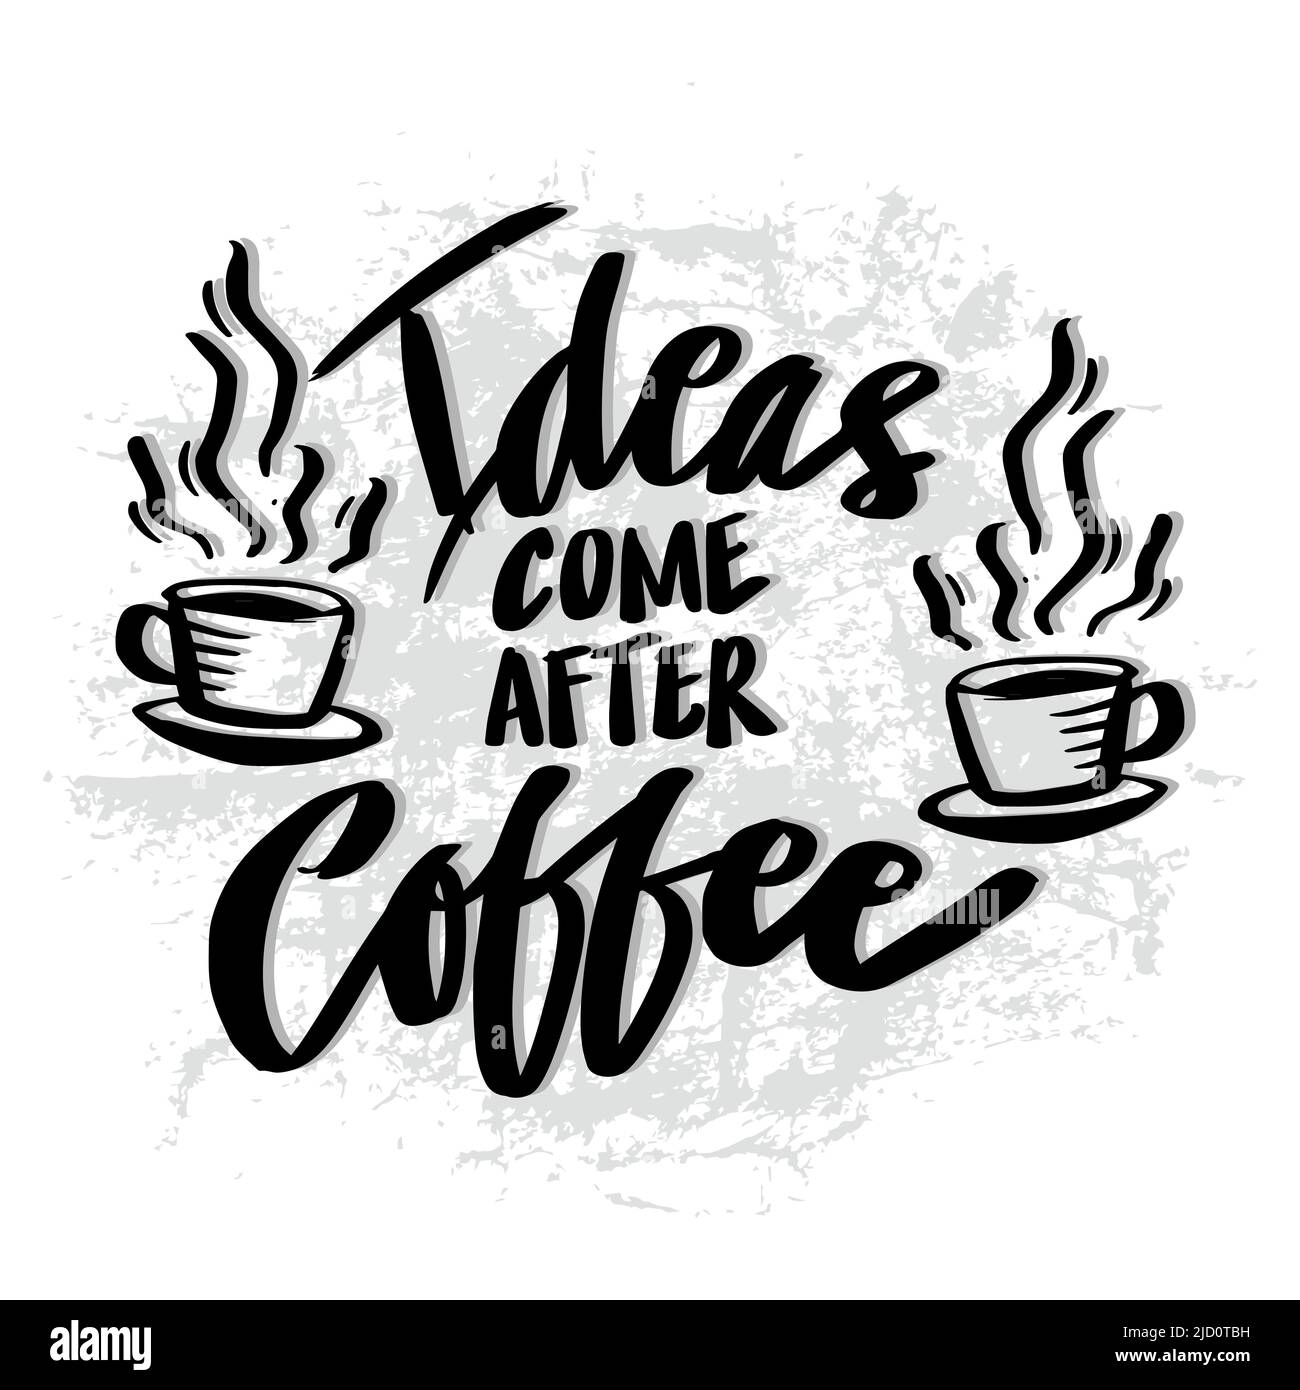 Ideas come after coffee. Poster quotes. Stock Photo